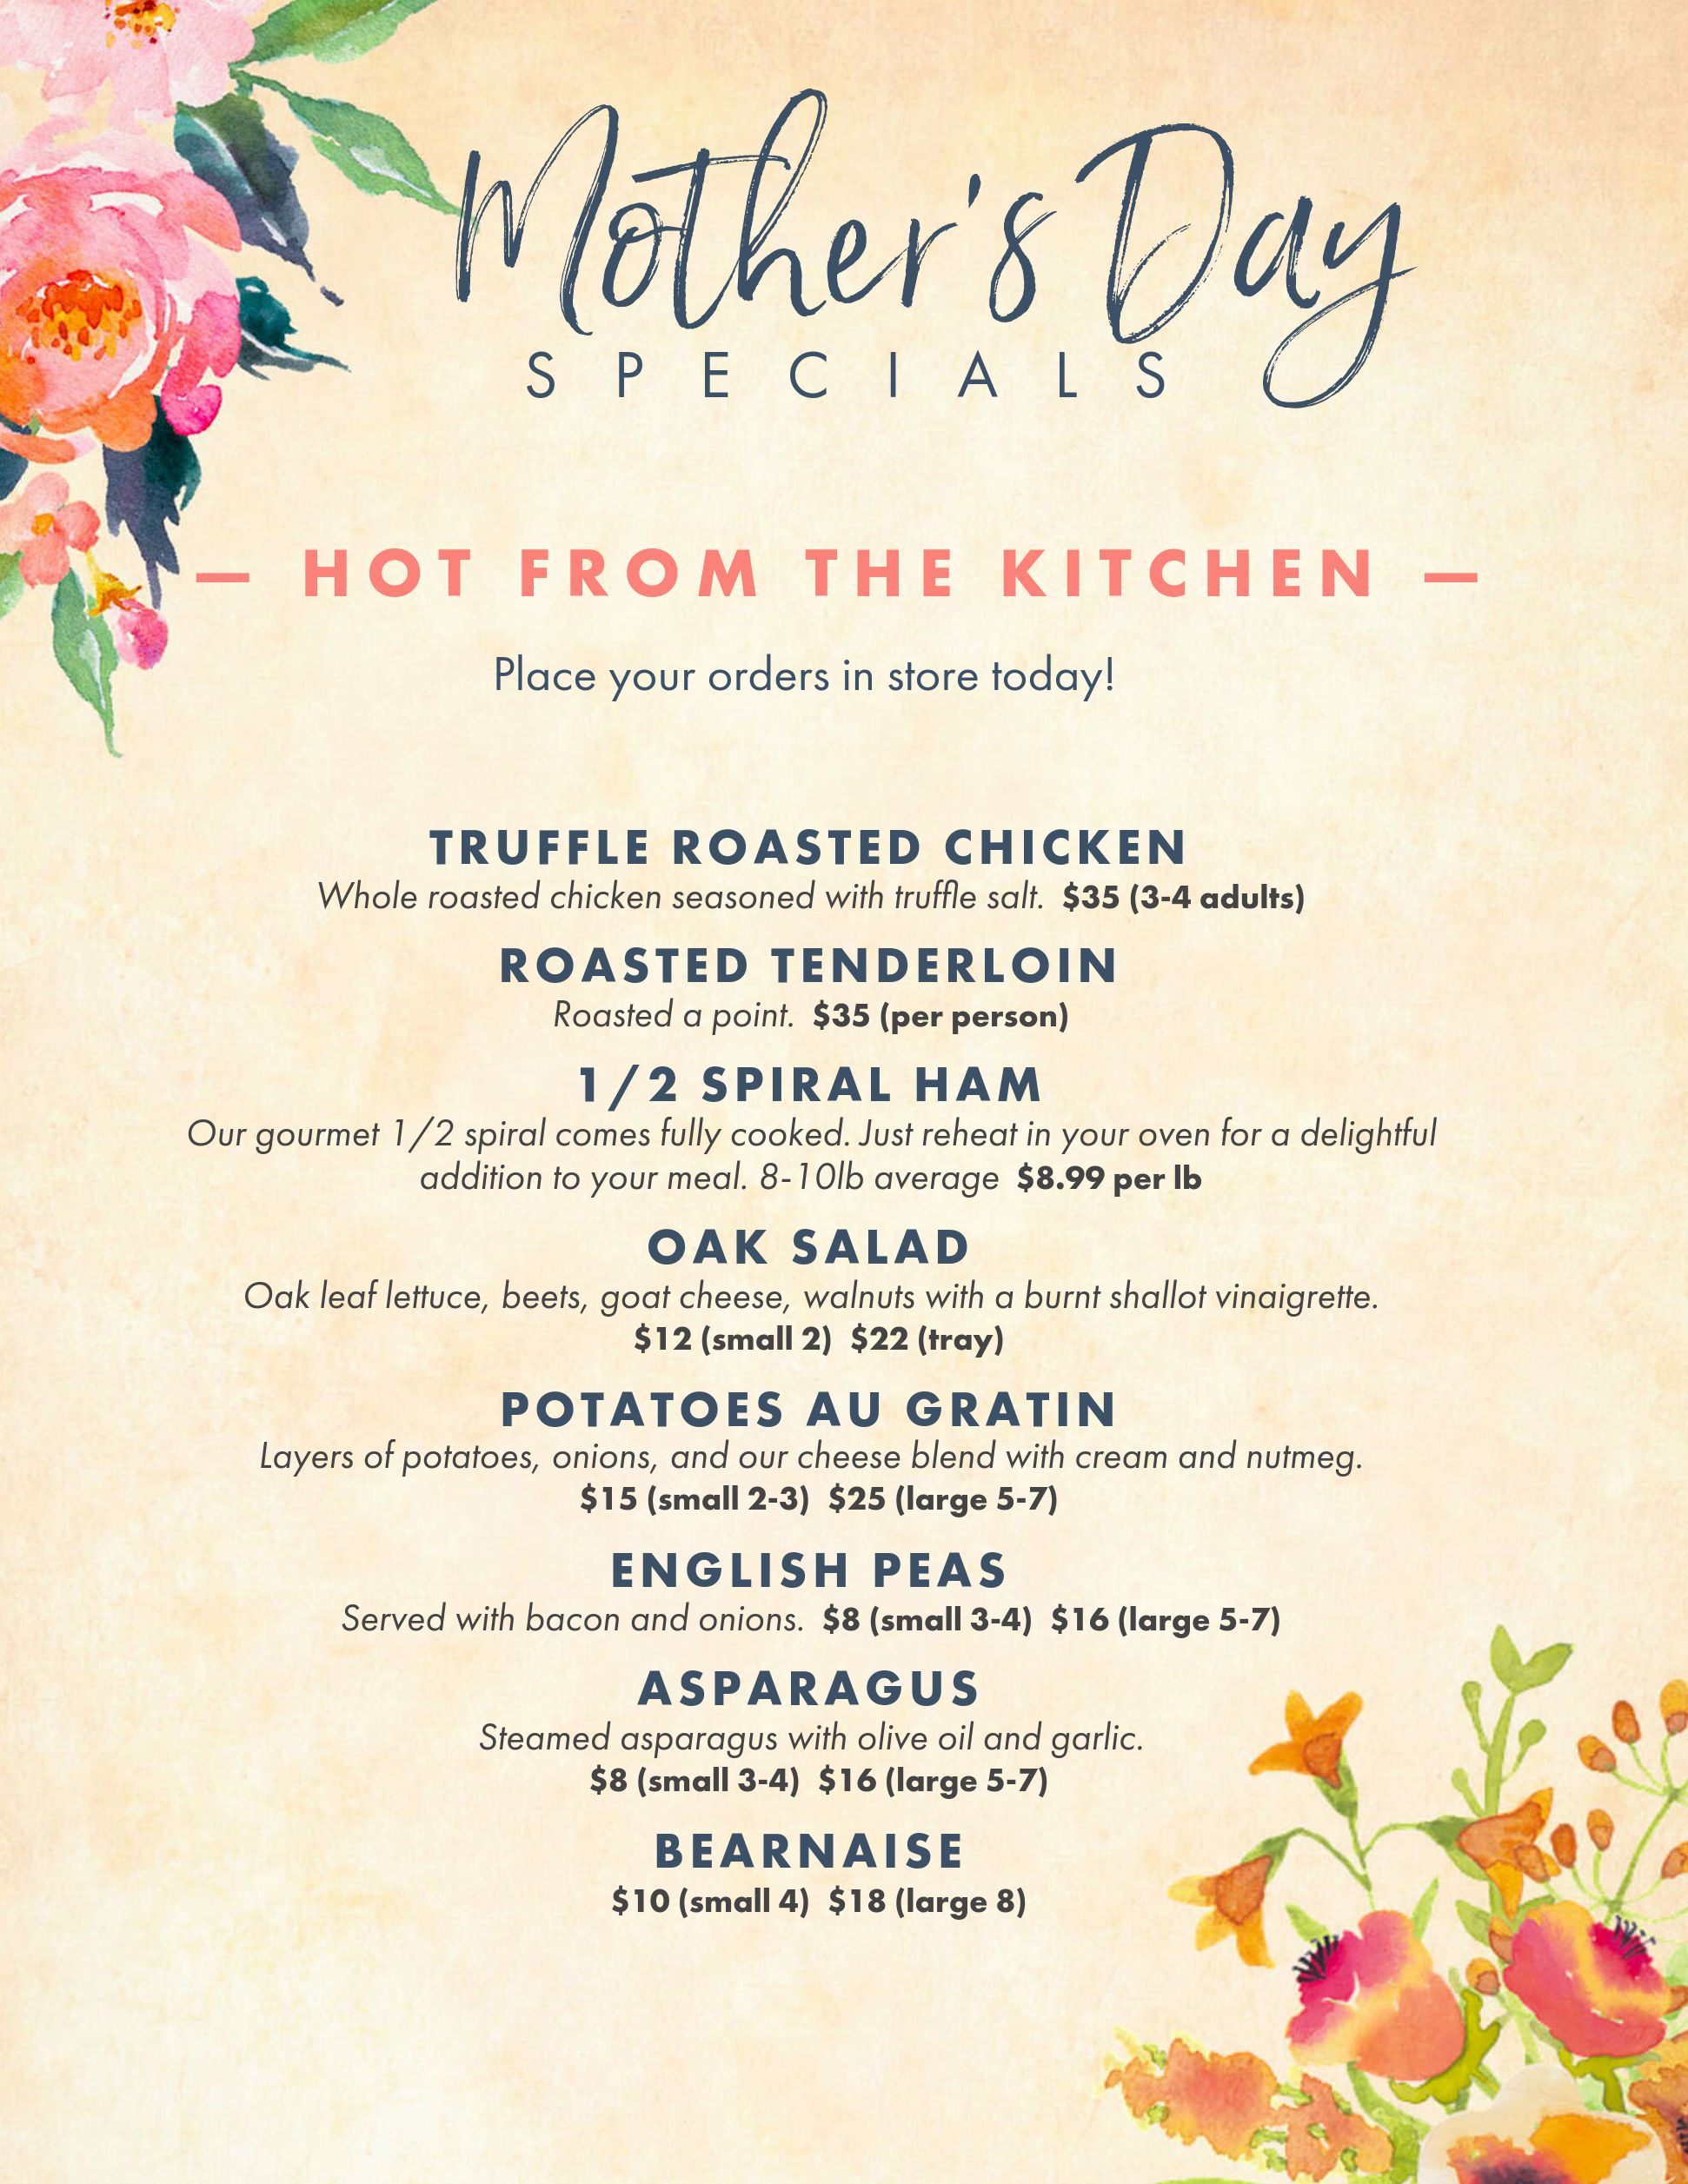 Old Greenwich Butcher Shop - Mothers Day Menu 2022